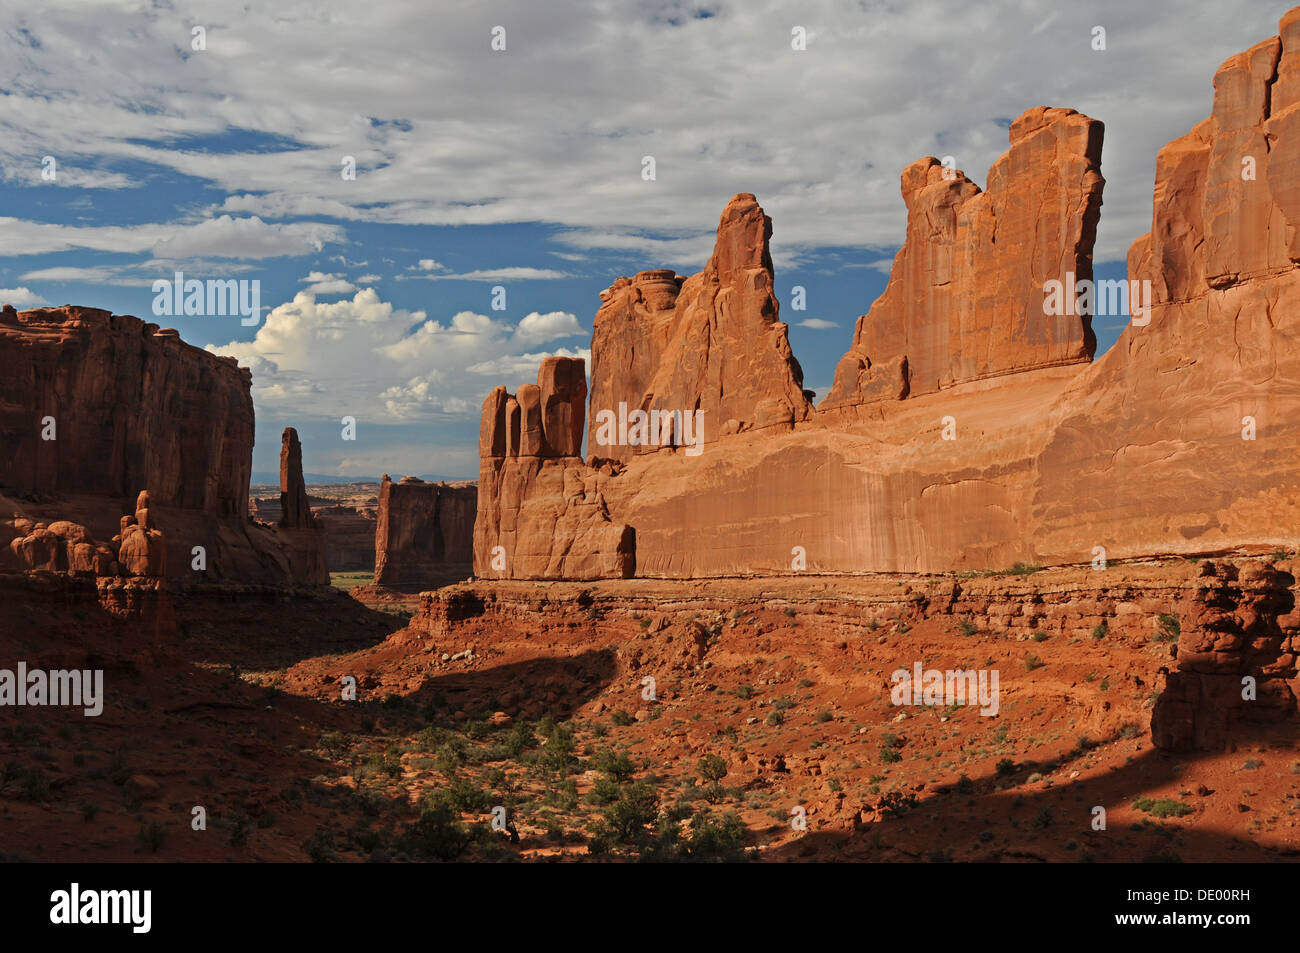 Scenic view of Courthouse Towers in Arches National Park in Utah at sunrise Stock Photo